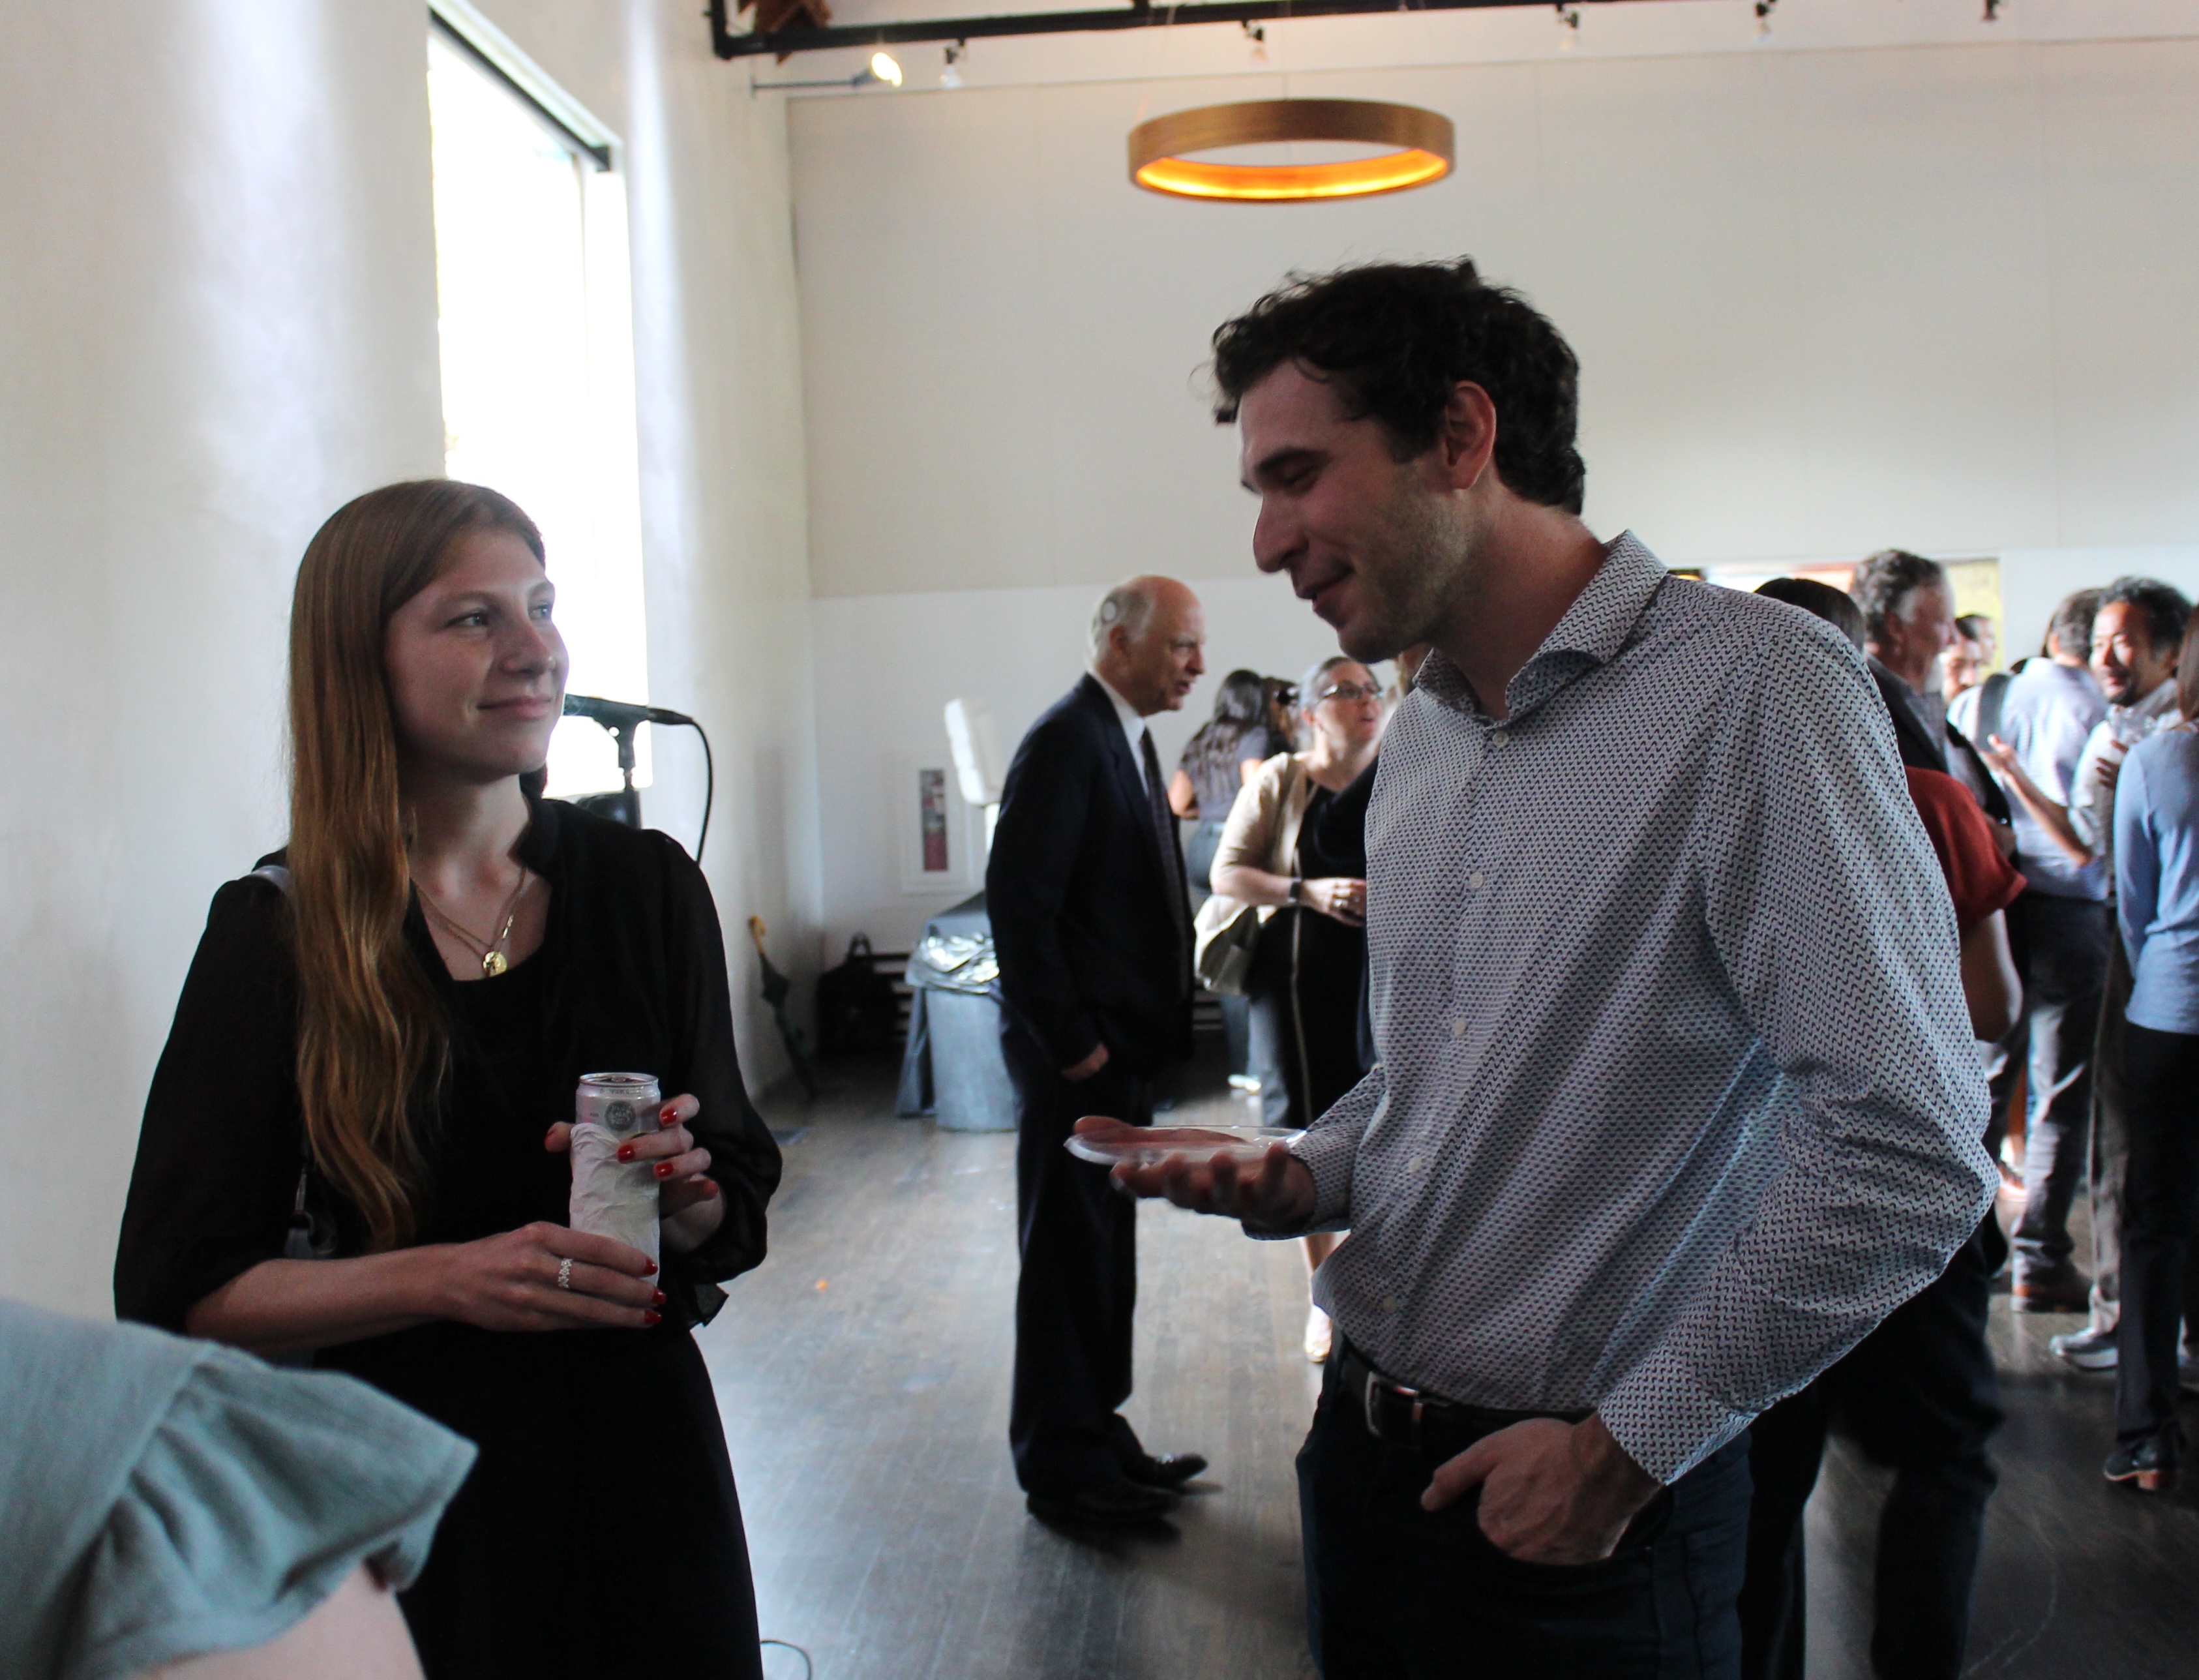 Tess Stopczynski and Trey McGonigle chat at a department reception